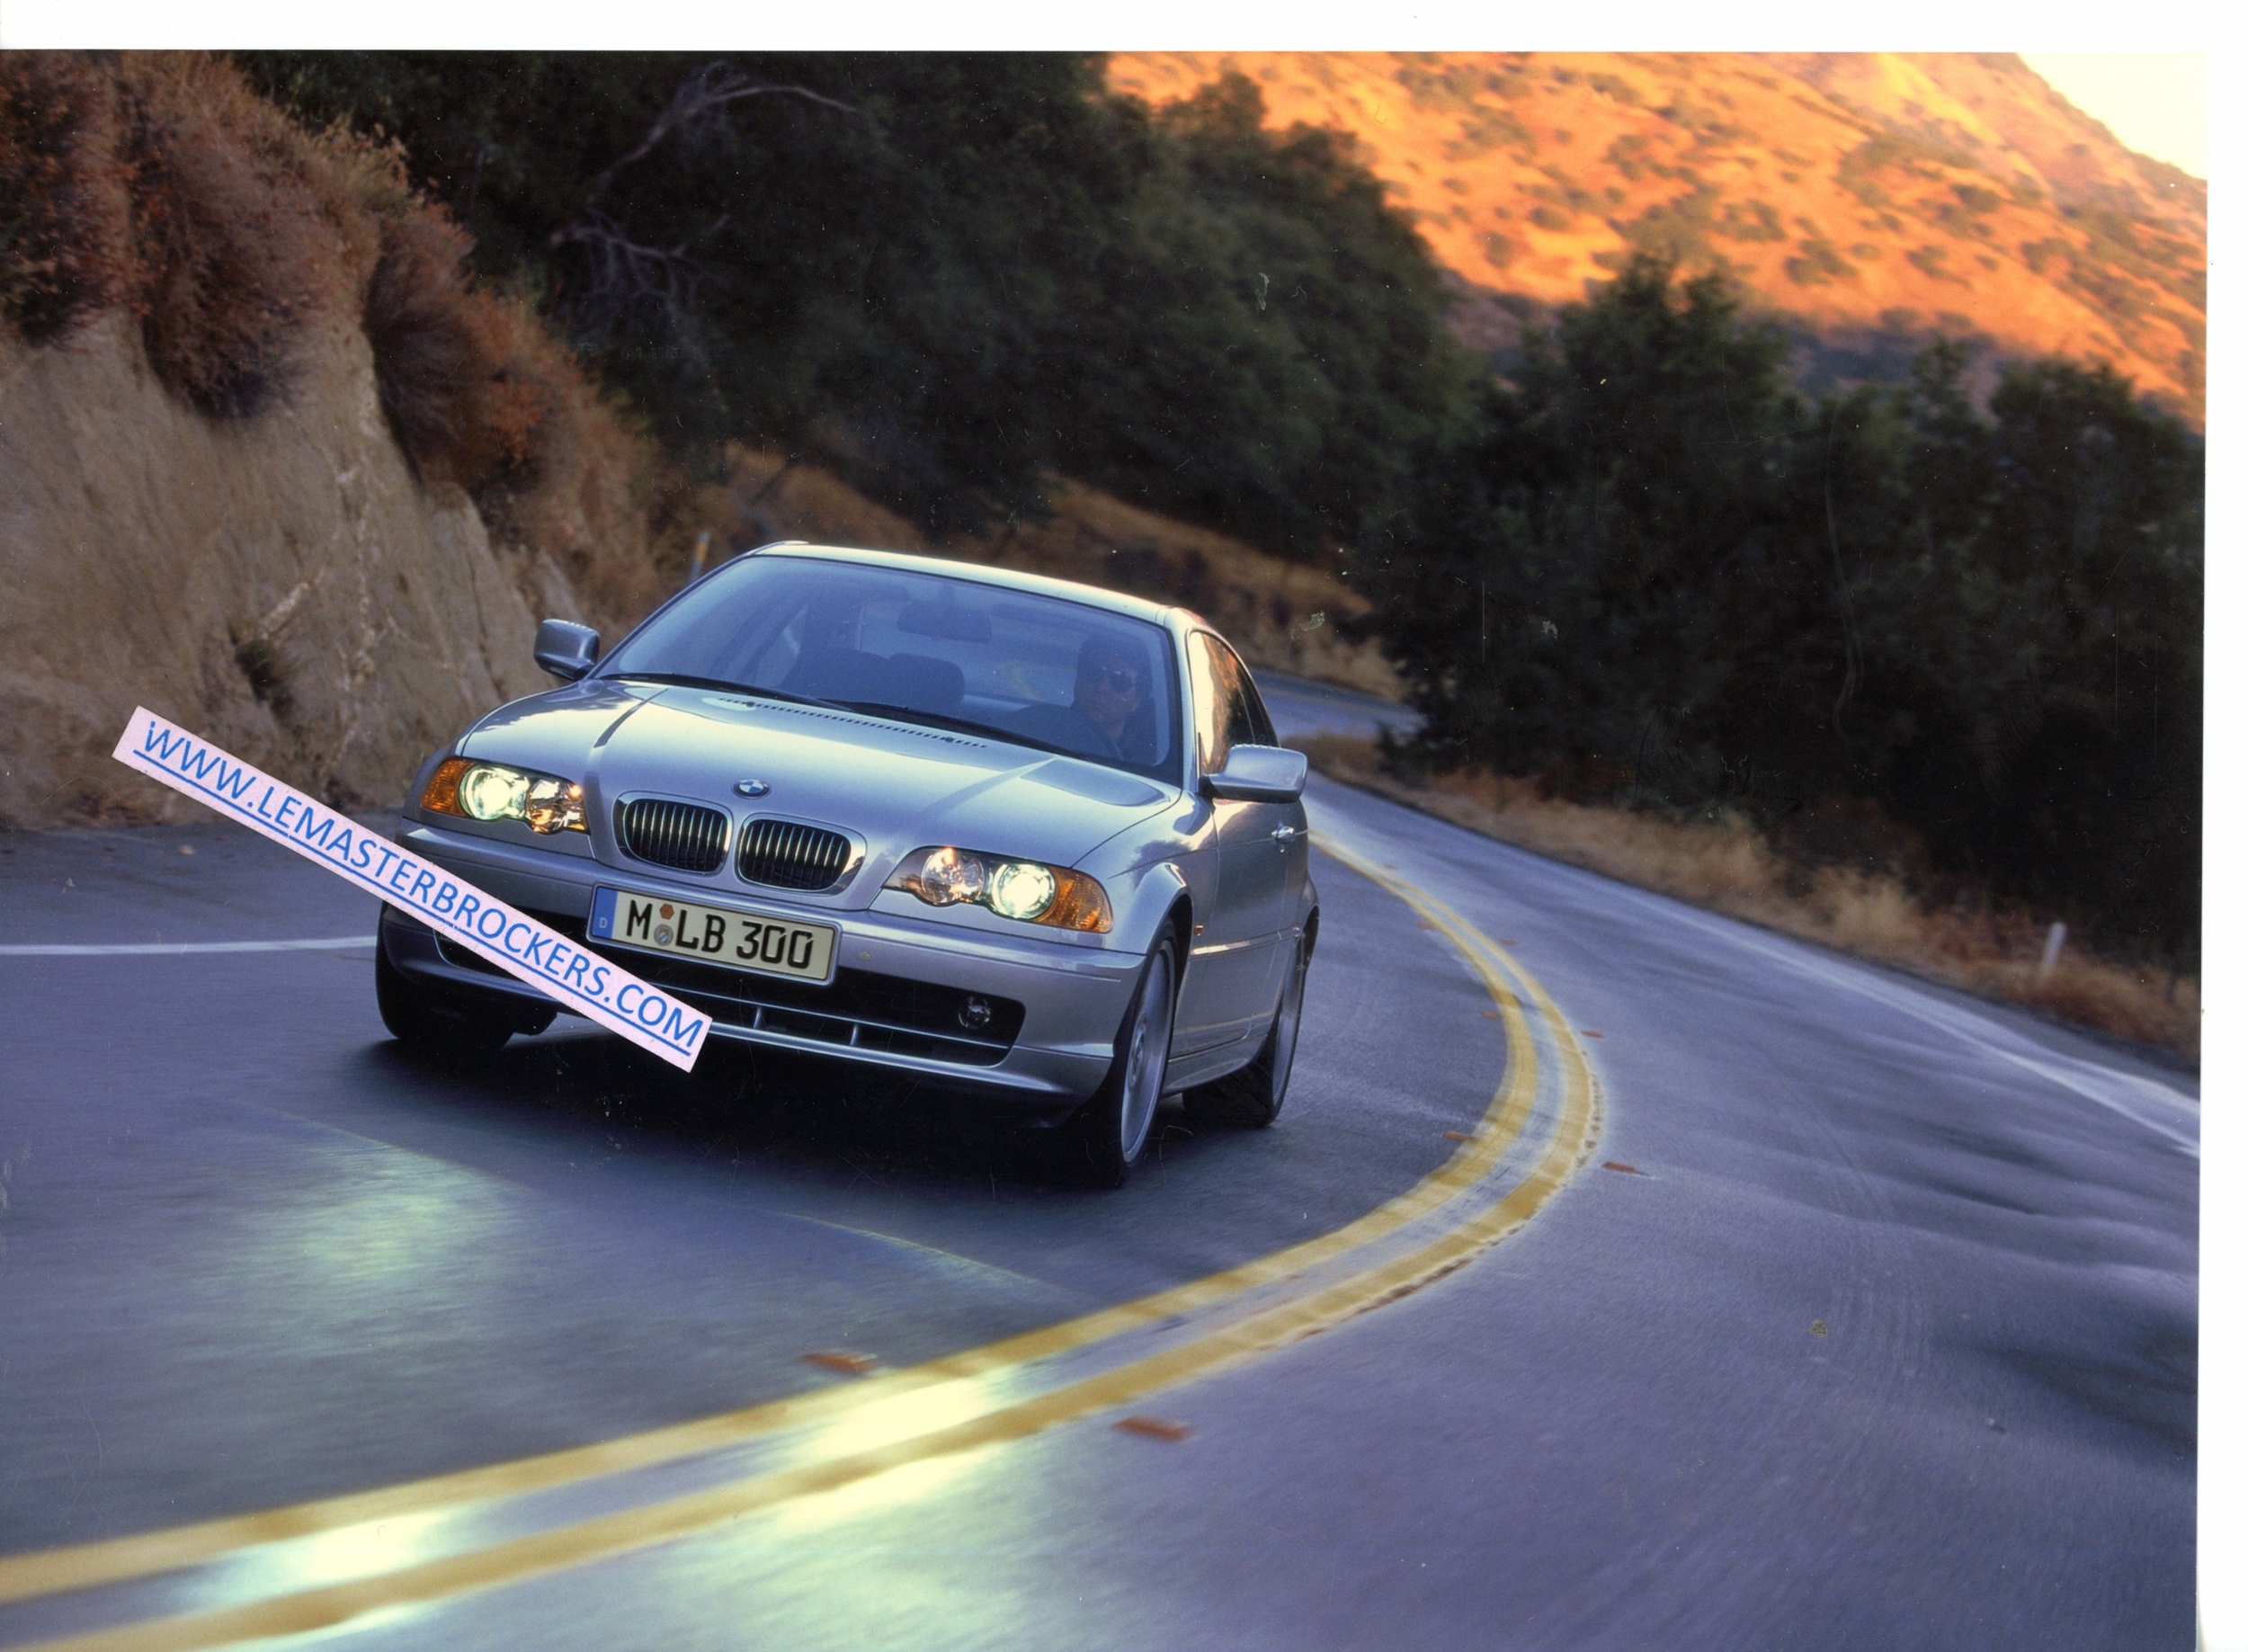 PHOTO BMW SERIE 3 COUPE - PHOTOGRAPHIE BMW AG RE 98.3.2209